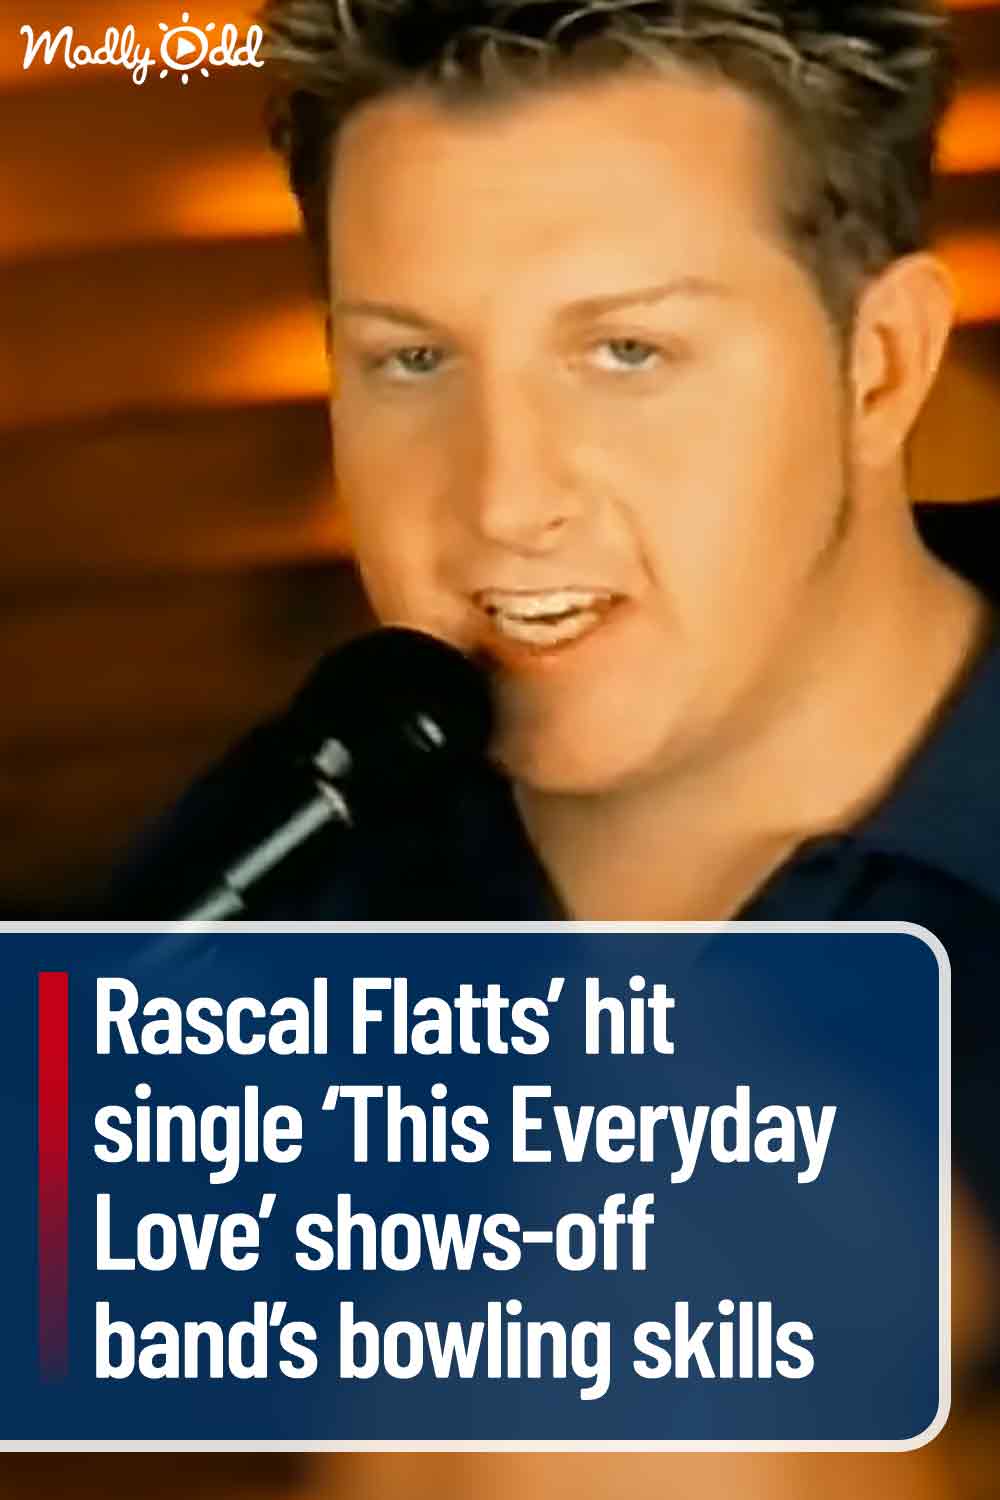 Rascal Flatts’ hit single ‘This Everyday Love’ shows-off band’s bowling skills